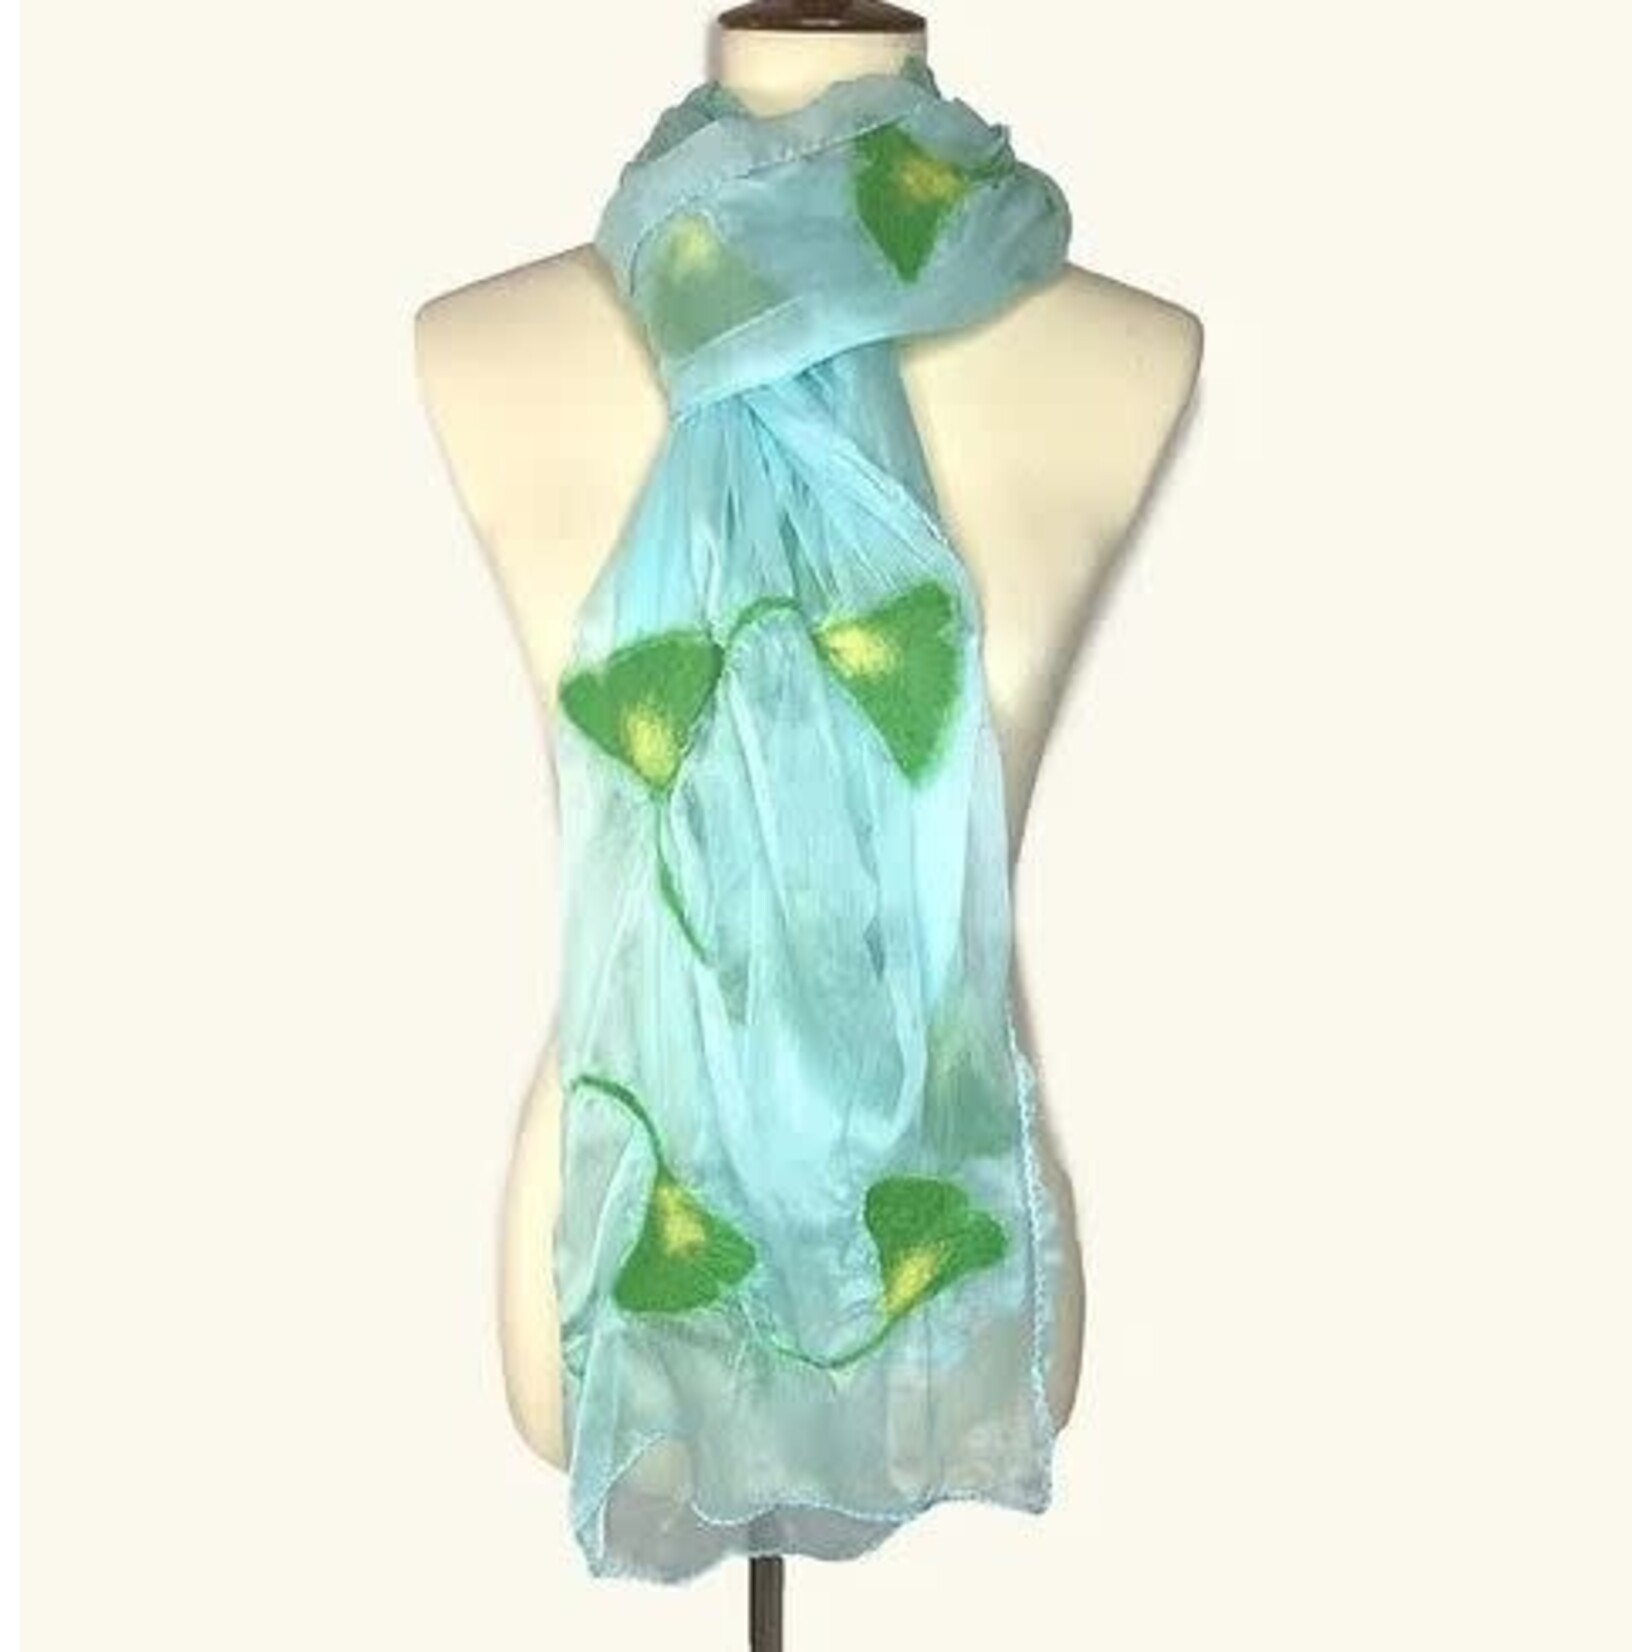 Pomegranate Moon Spring Blue & Green Ginkgo Scarf